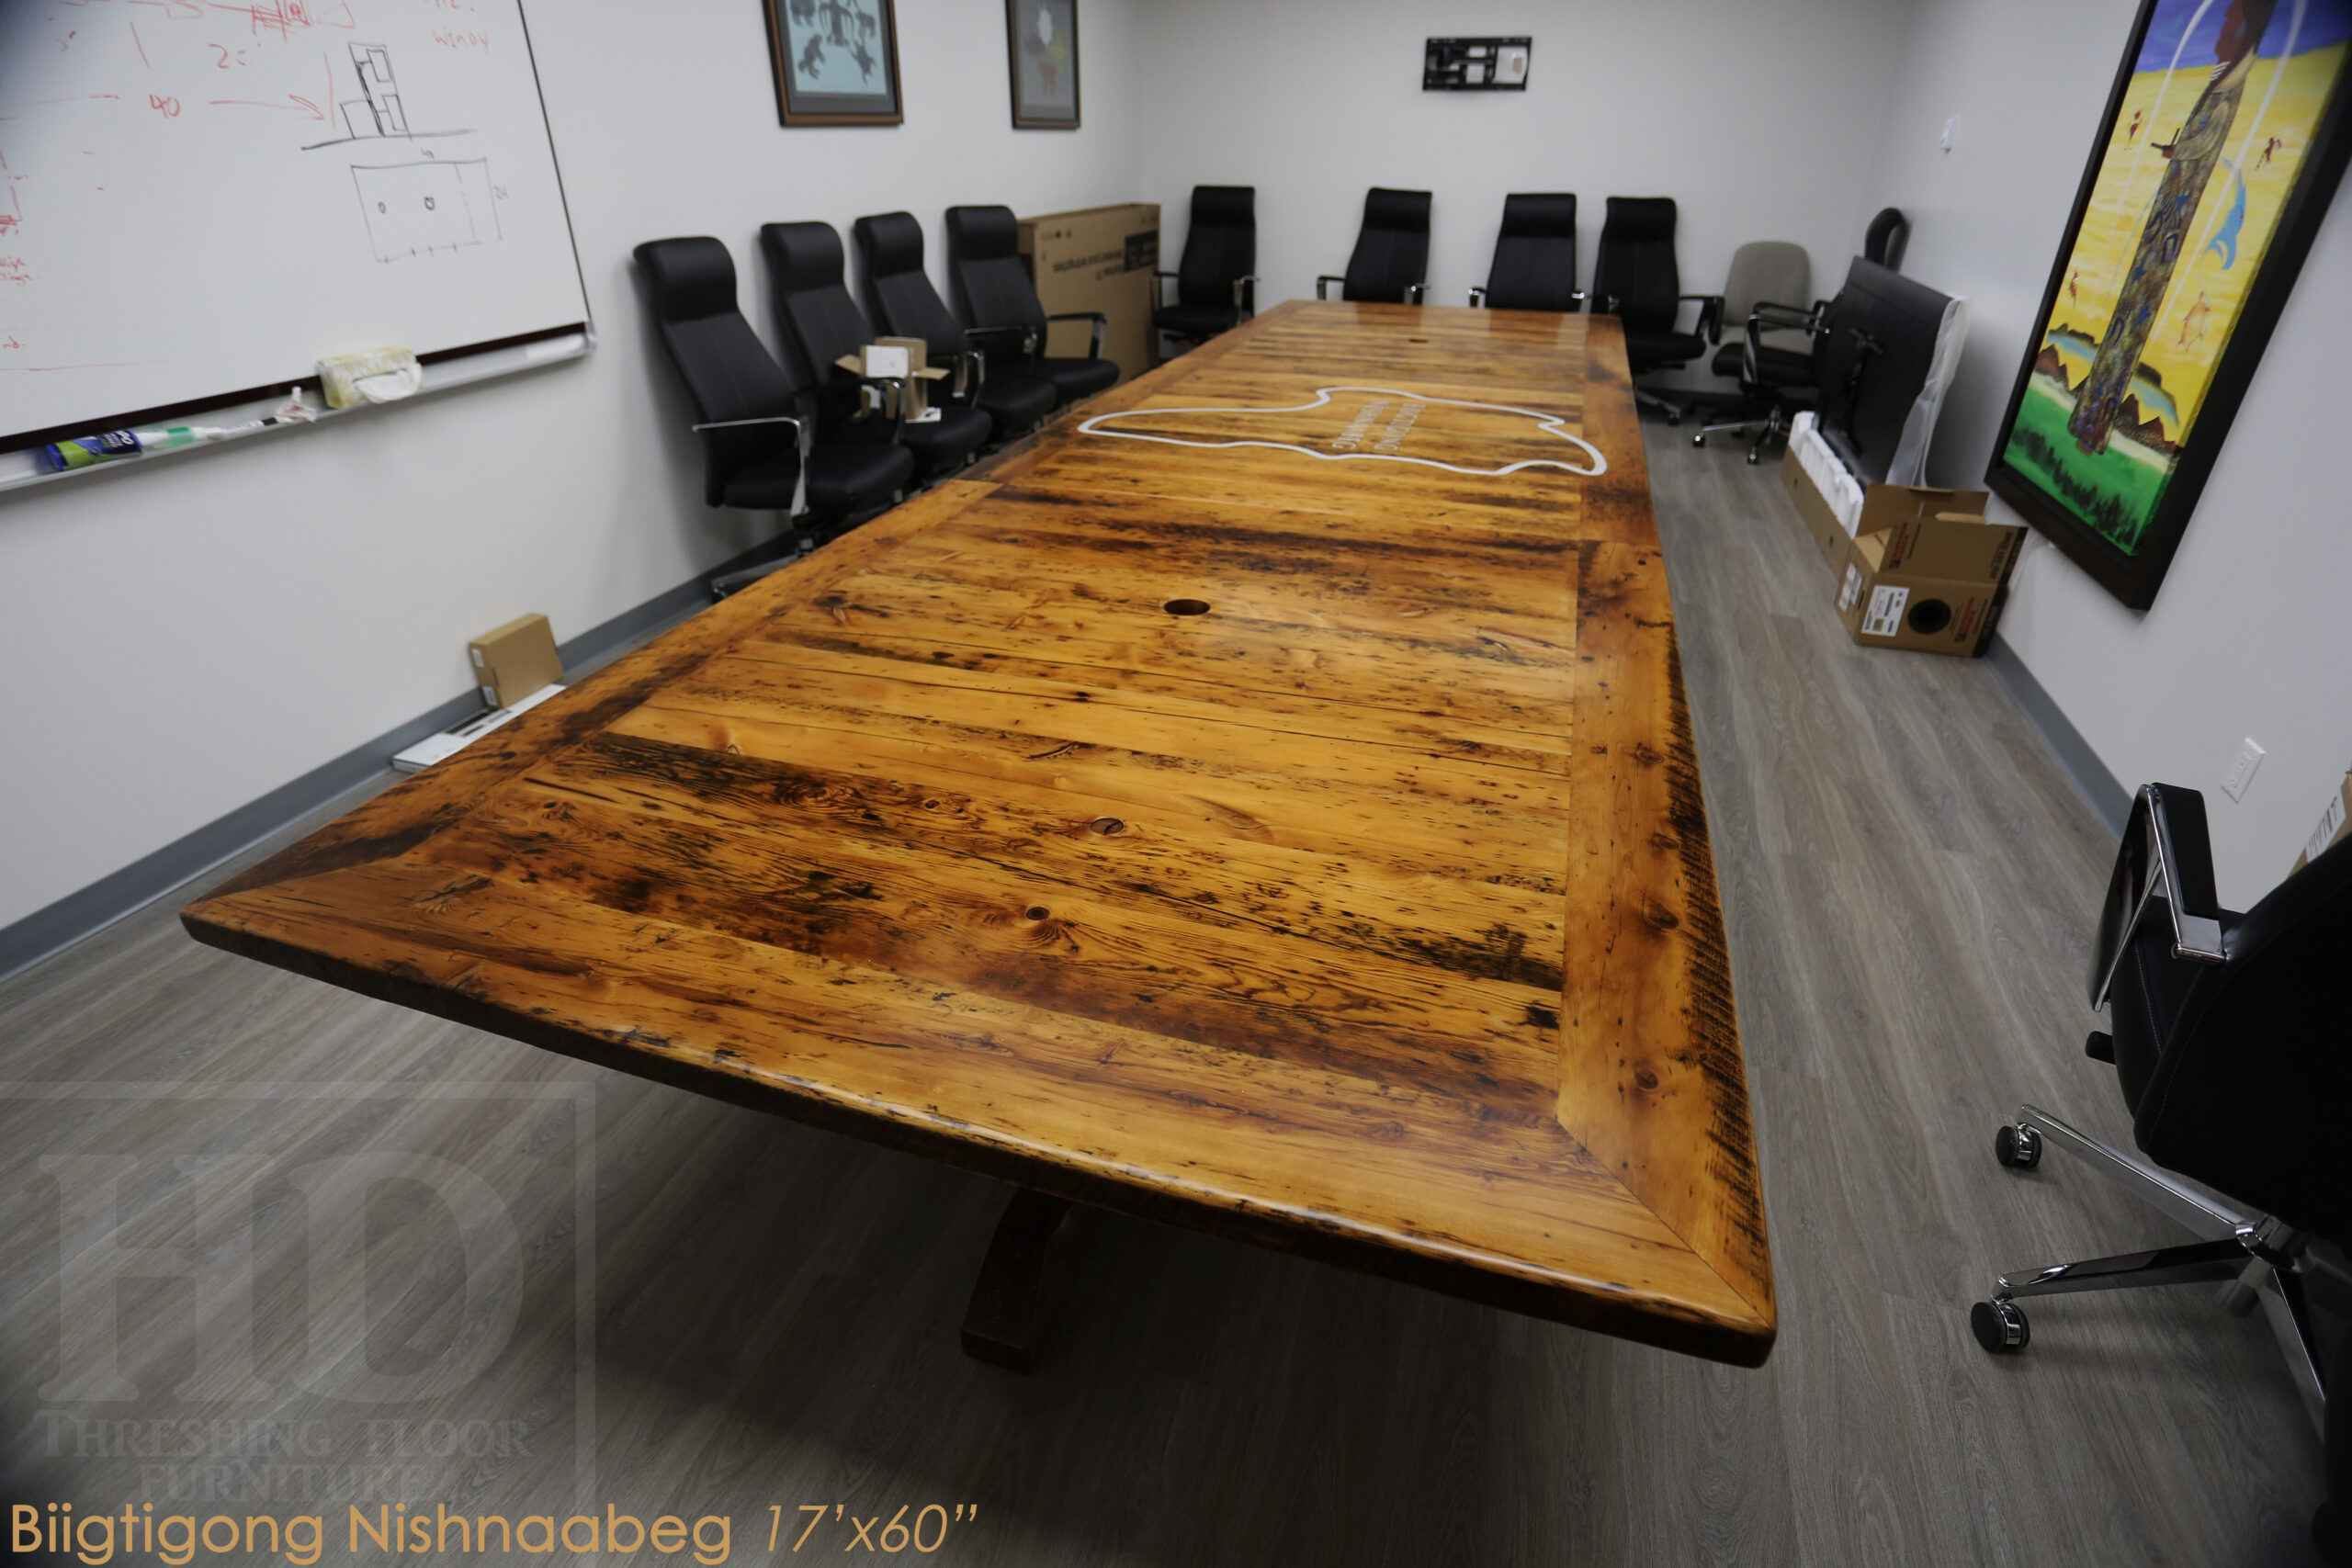 Project details: 17â€™ Reclaimed Ontario Barnwood Table we made for a Marathon, Ontario community centre â€“ Hand-Hewn Beam Pedestals Base - Old Growth Hemlock Threshing Floor Construction â€“ Original edges & distressing maintained â€“ Bread Edge Ends â€“ Custom Steel Graphic Embedded - Premium epoxy + satin polyurethane finish â€“ Top Built in 3 parts / Onsite Final Assembly - www.table.ca